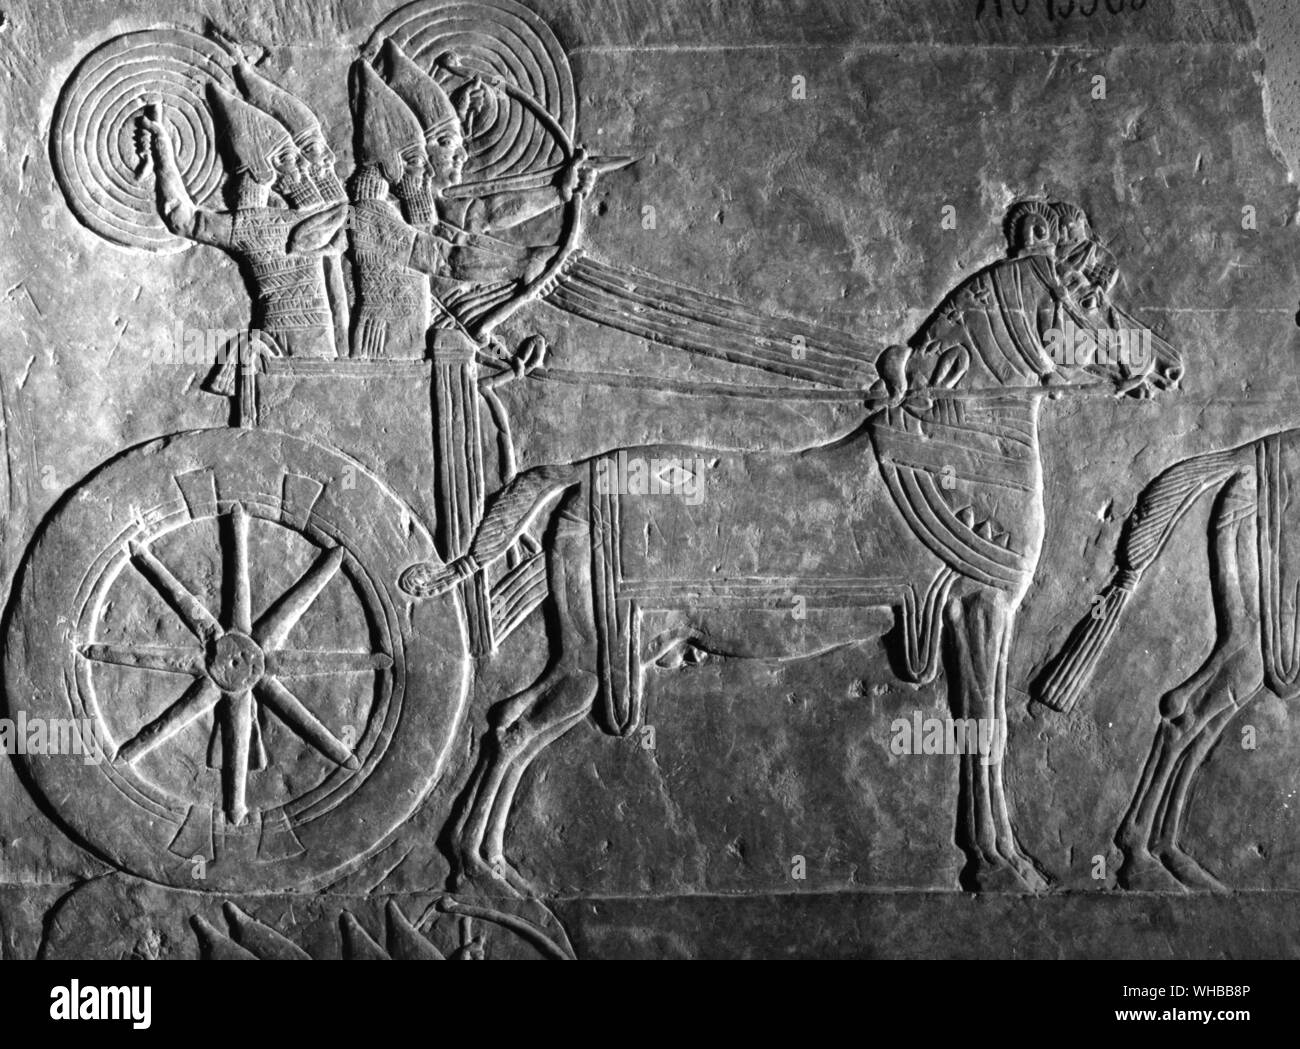 Assyrian relief from the Palace of Ashurbanipal : Mesopotamian chariot , 7th Century BC Stock Photo